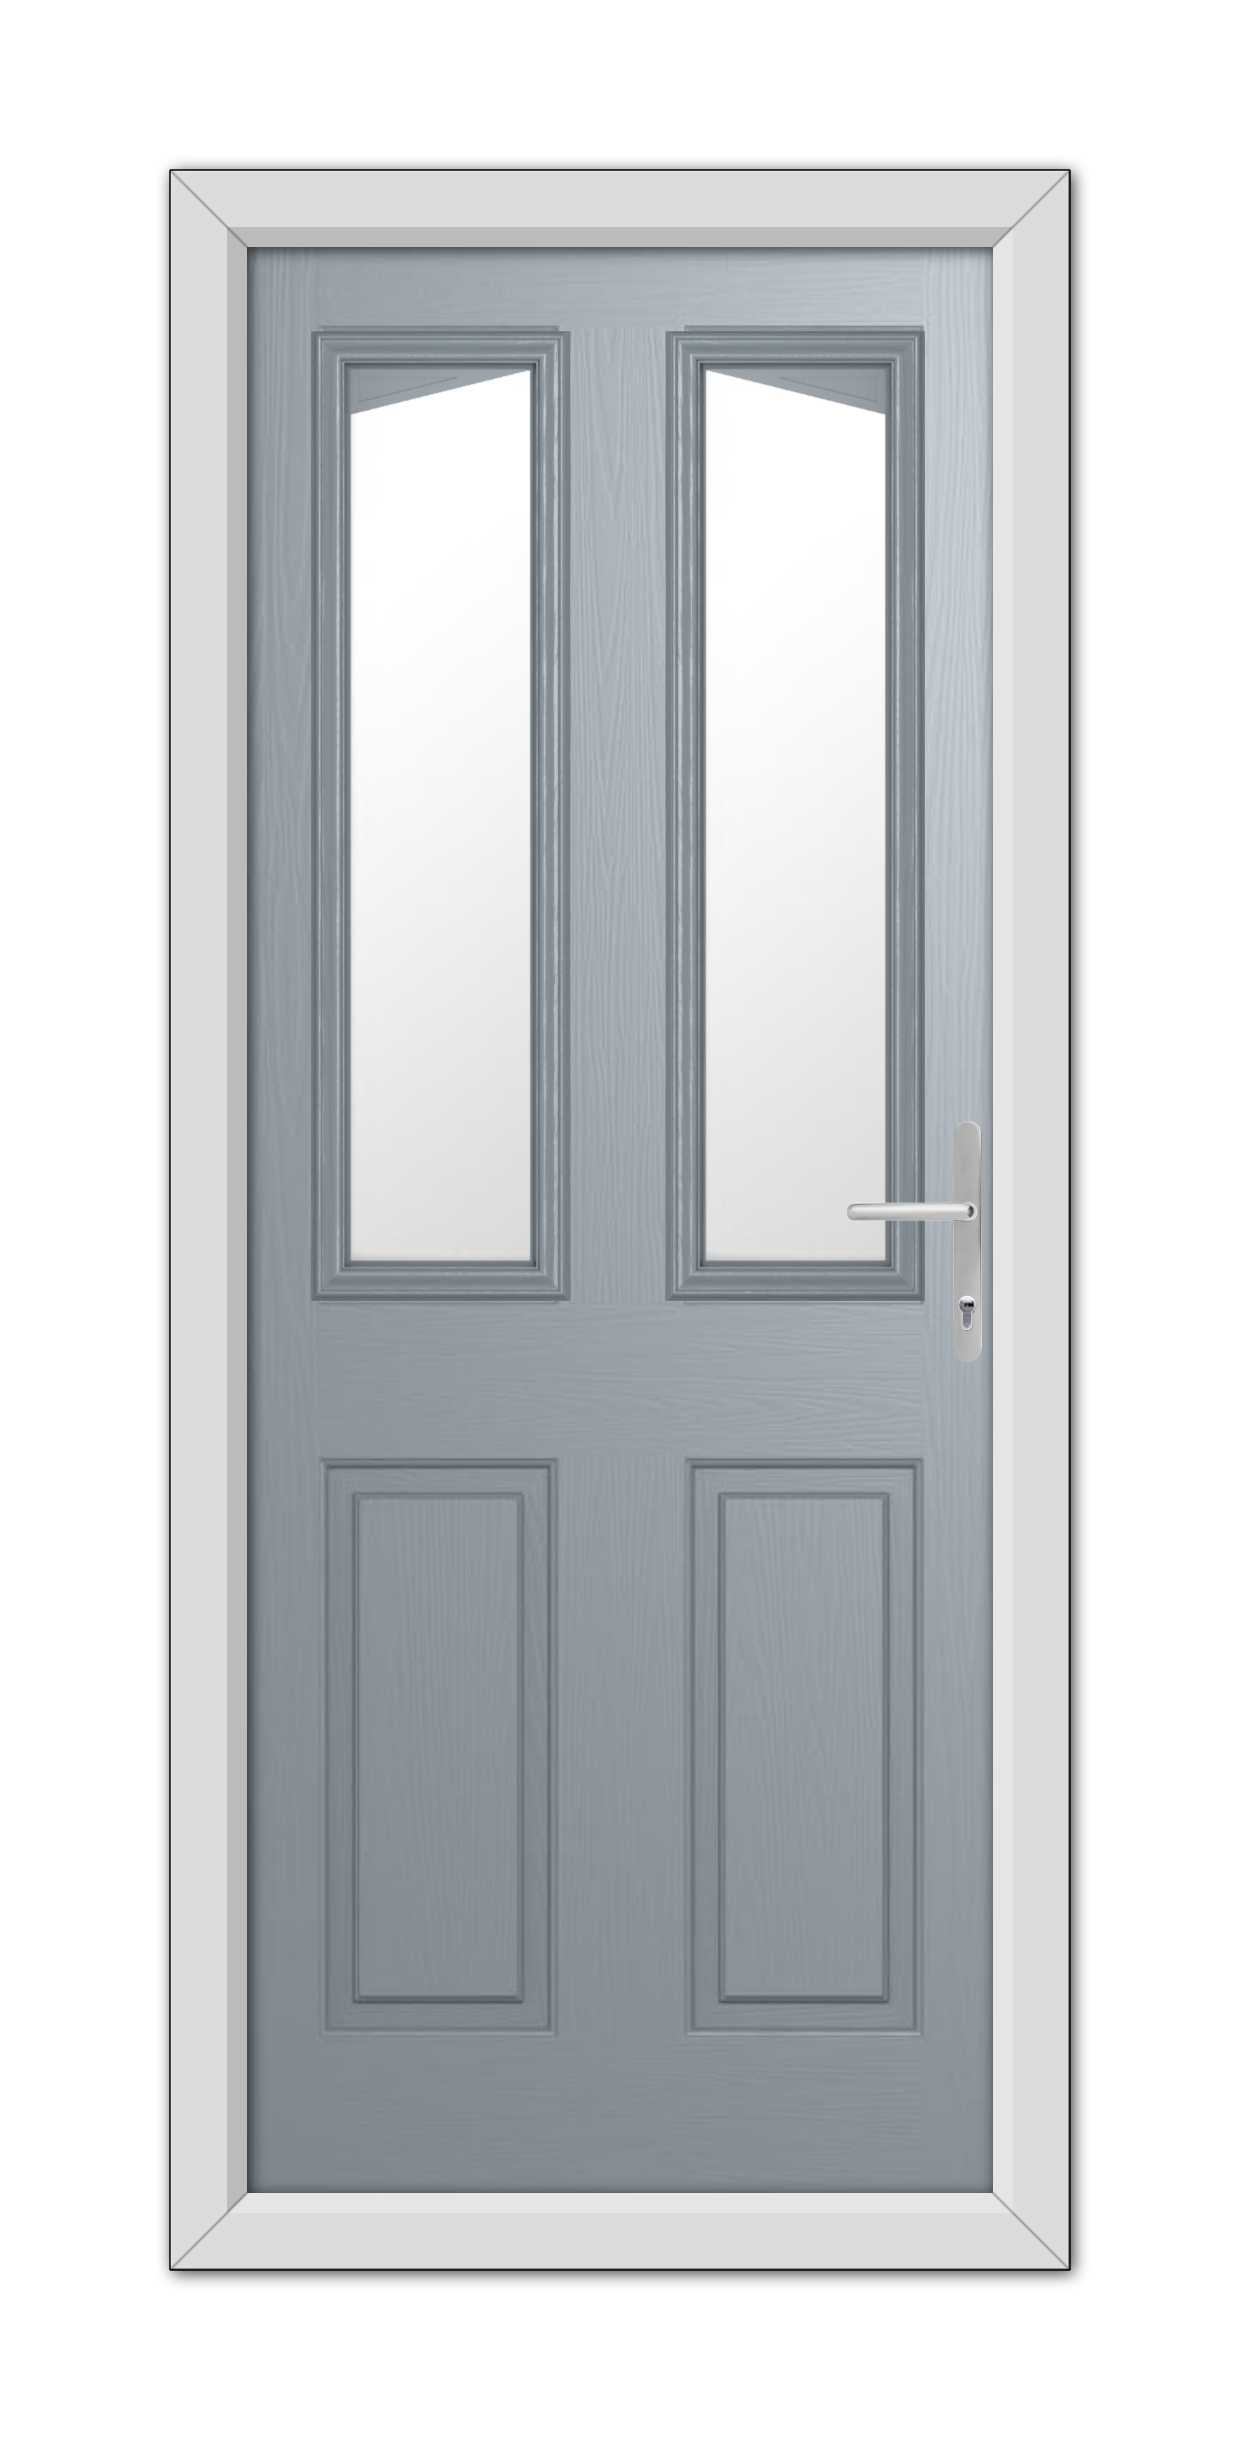 A modern French Grey Highbury Composite Door 48mm Timber Core with vertical glass panels and a metallic handle, set in a white frame.